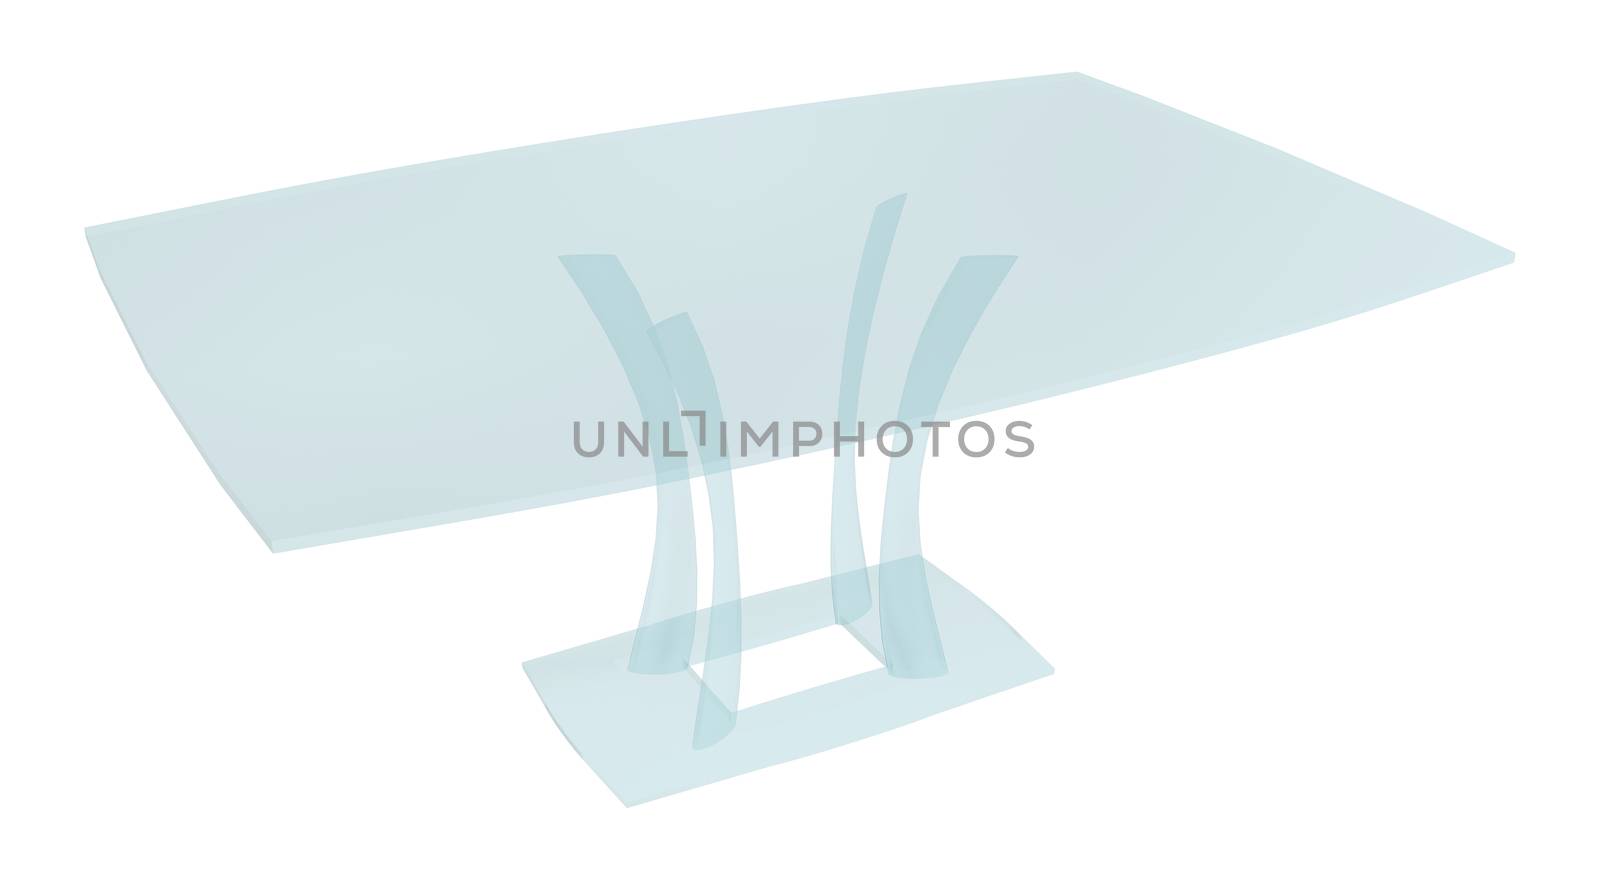 Tinted all-glass rectangular coffee table, 3D illustration by Morphart